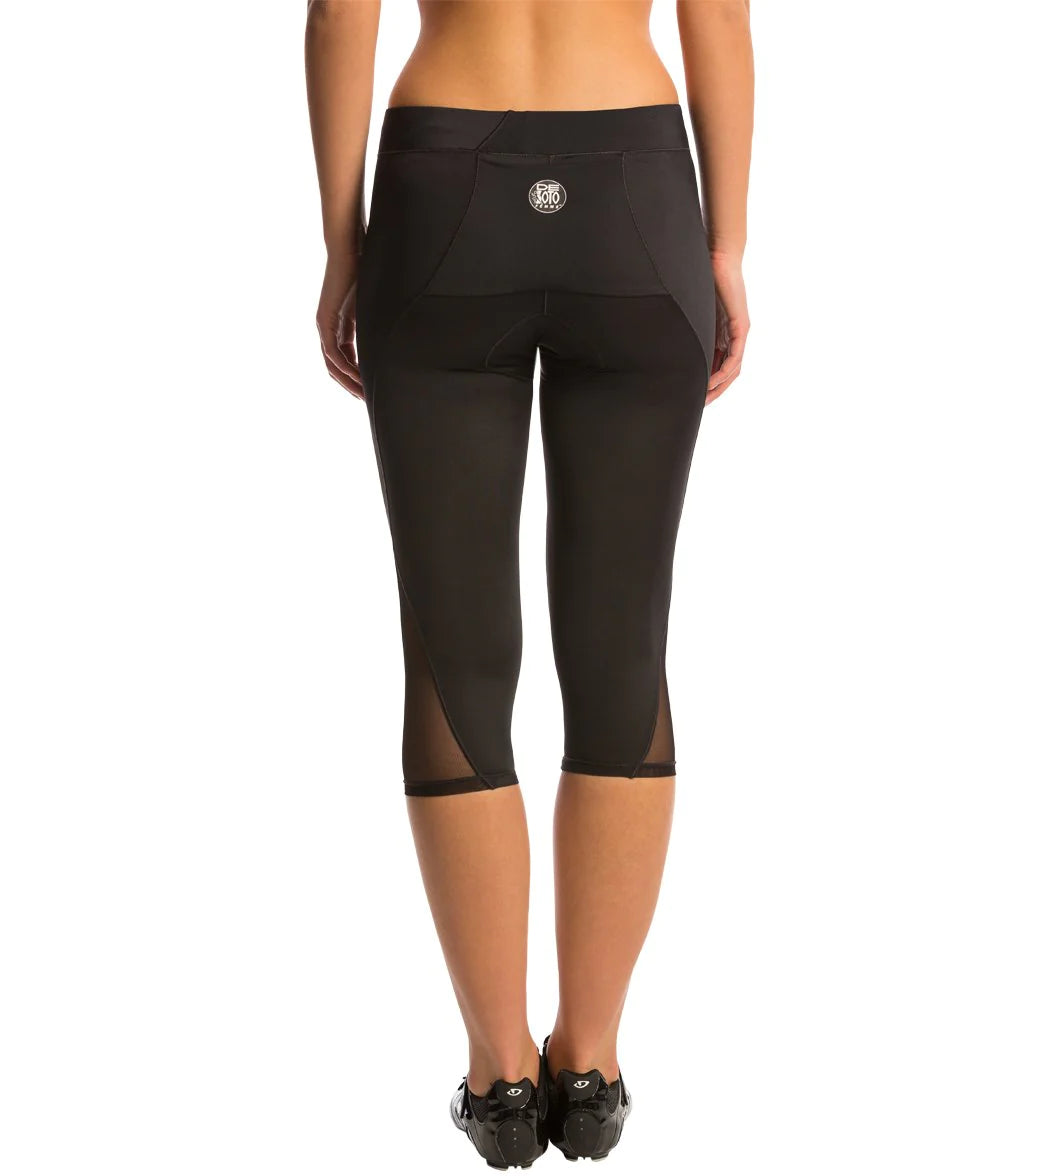 Rays A India Stretchable 3/4th Capri Leggings for Women/Girls/Ladies - Free  Size -Multi-Color.